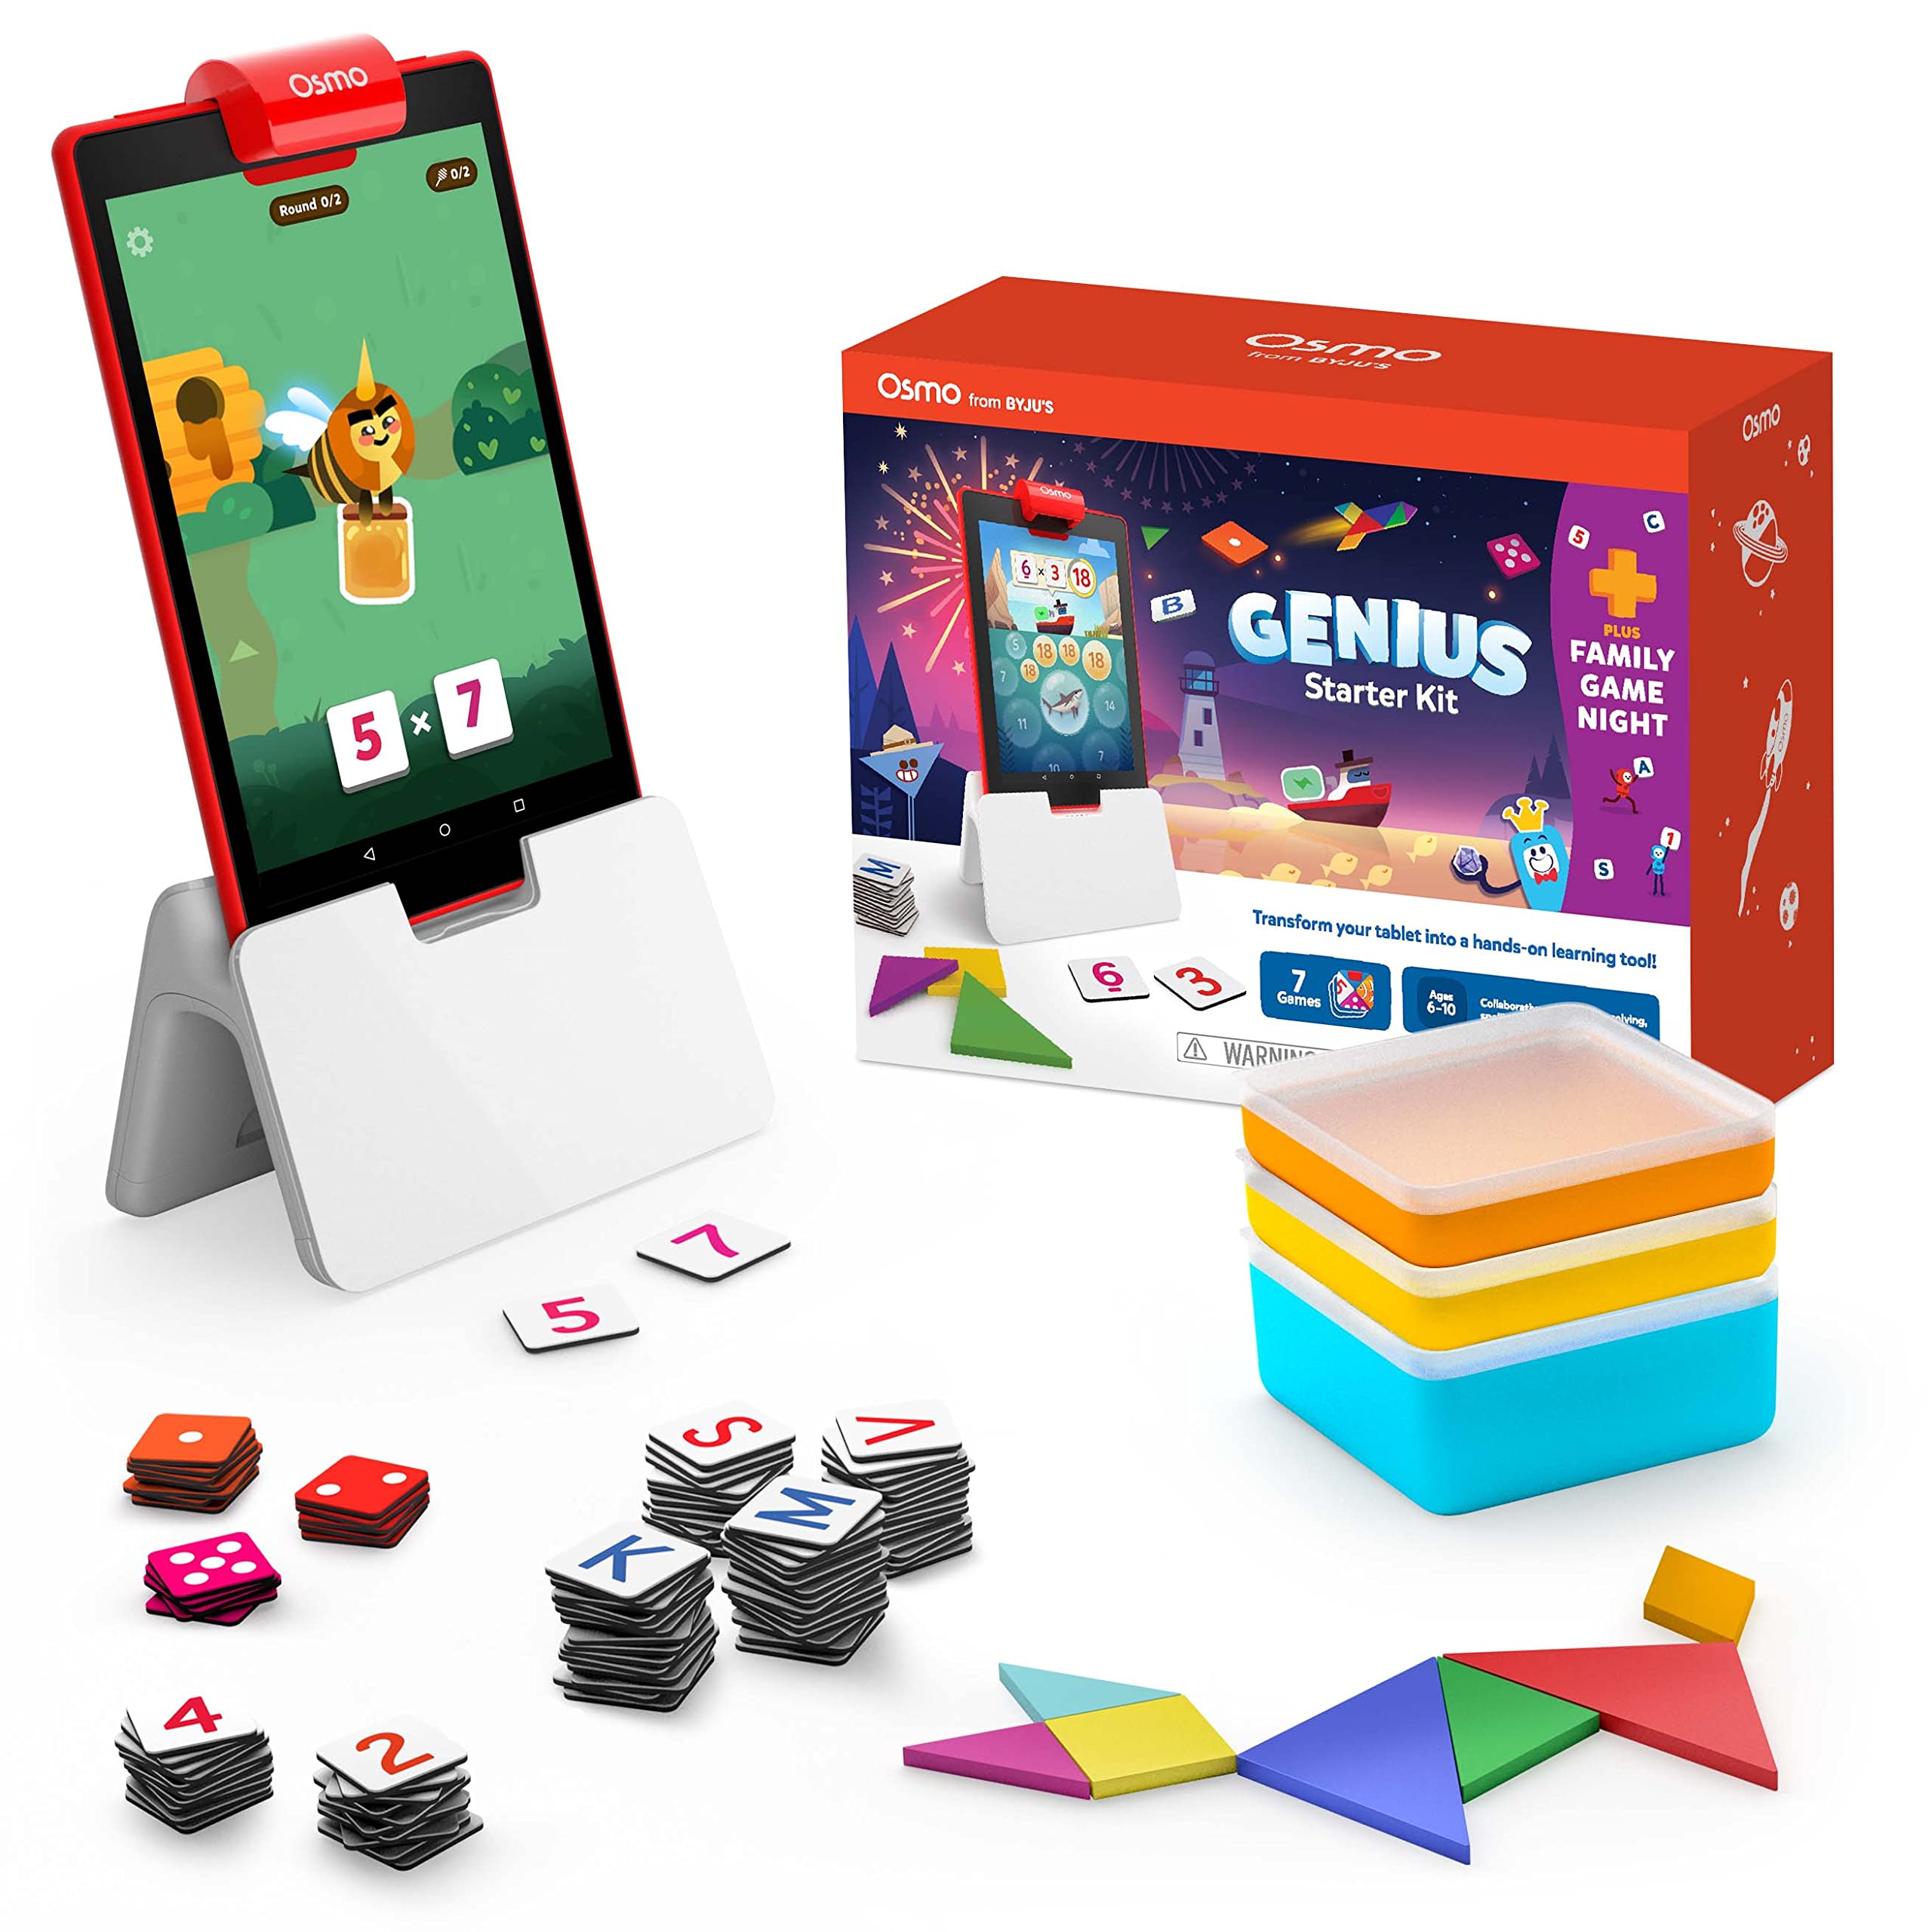 Osmo-Genius Starter Kit for Fire Tablet + Family Game Night-7 Educational Learning Games for Spelling,Math & more-Ages 6-10-STEM Toy Gifts- 6 7 8 9 10(Osmo Fire Tablet Base Included-Amazon Exclusive)